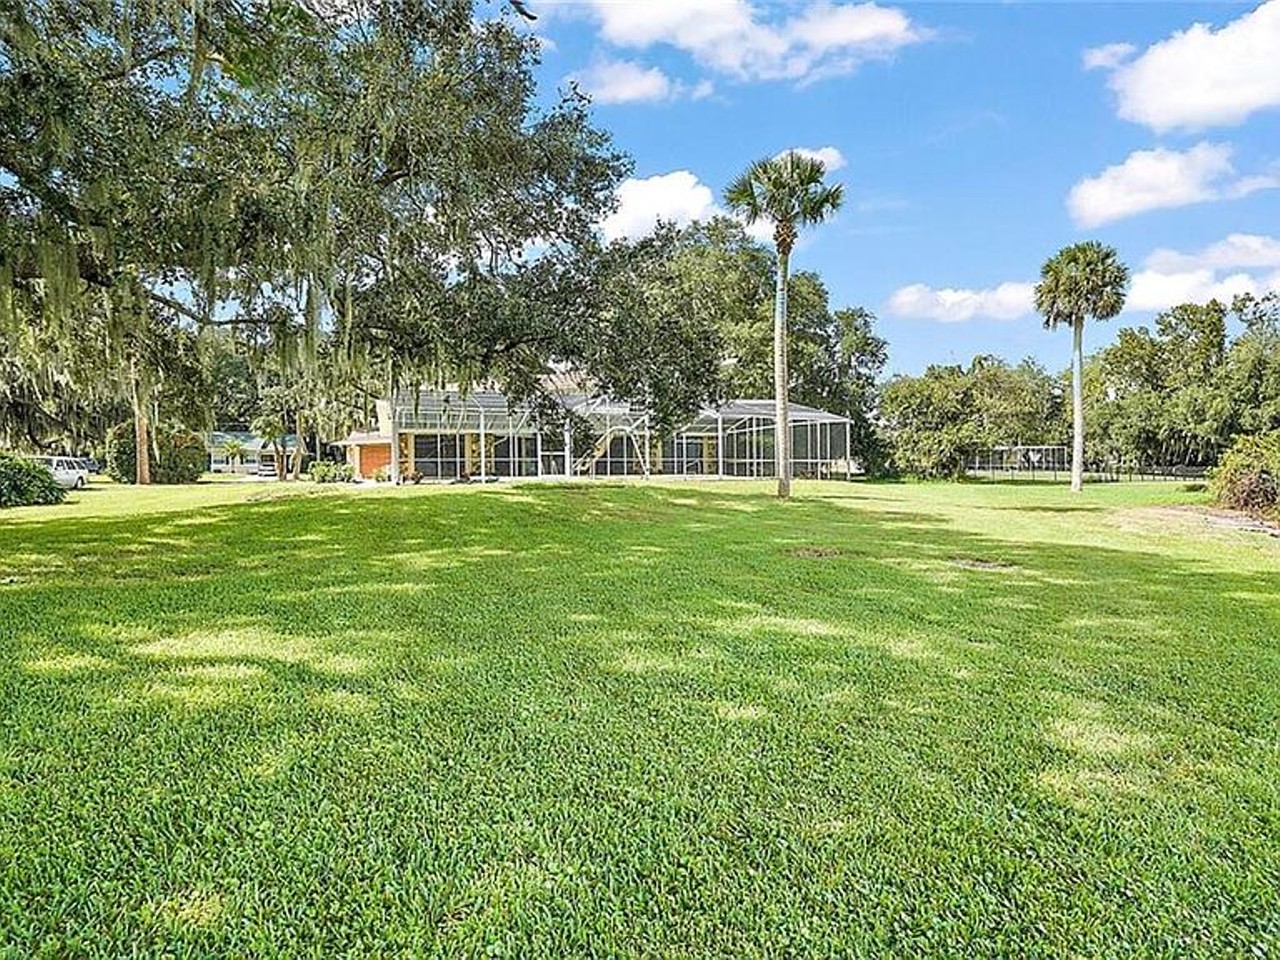 This Central Florida architect's luxurious lakefront residence has all mod cons, including a private generator